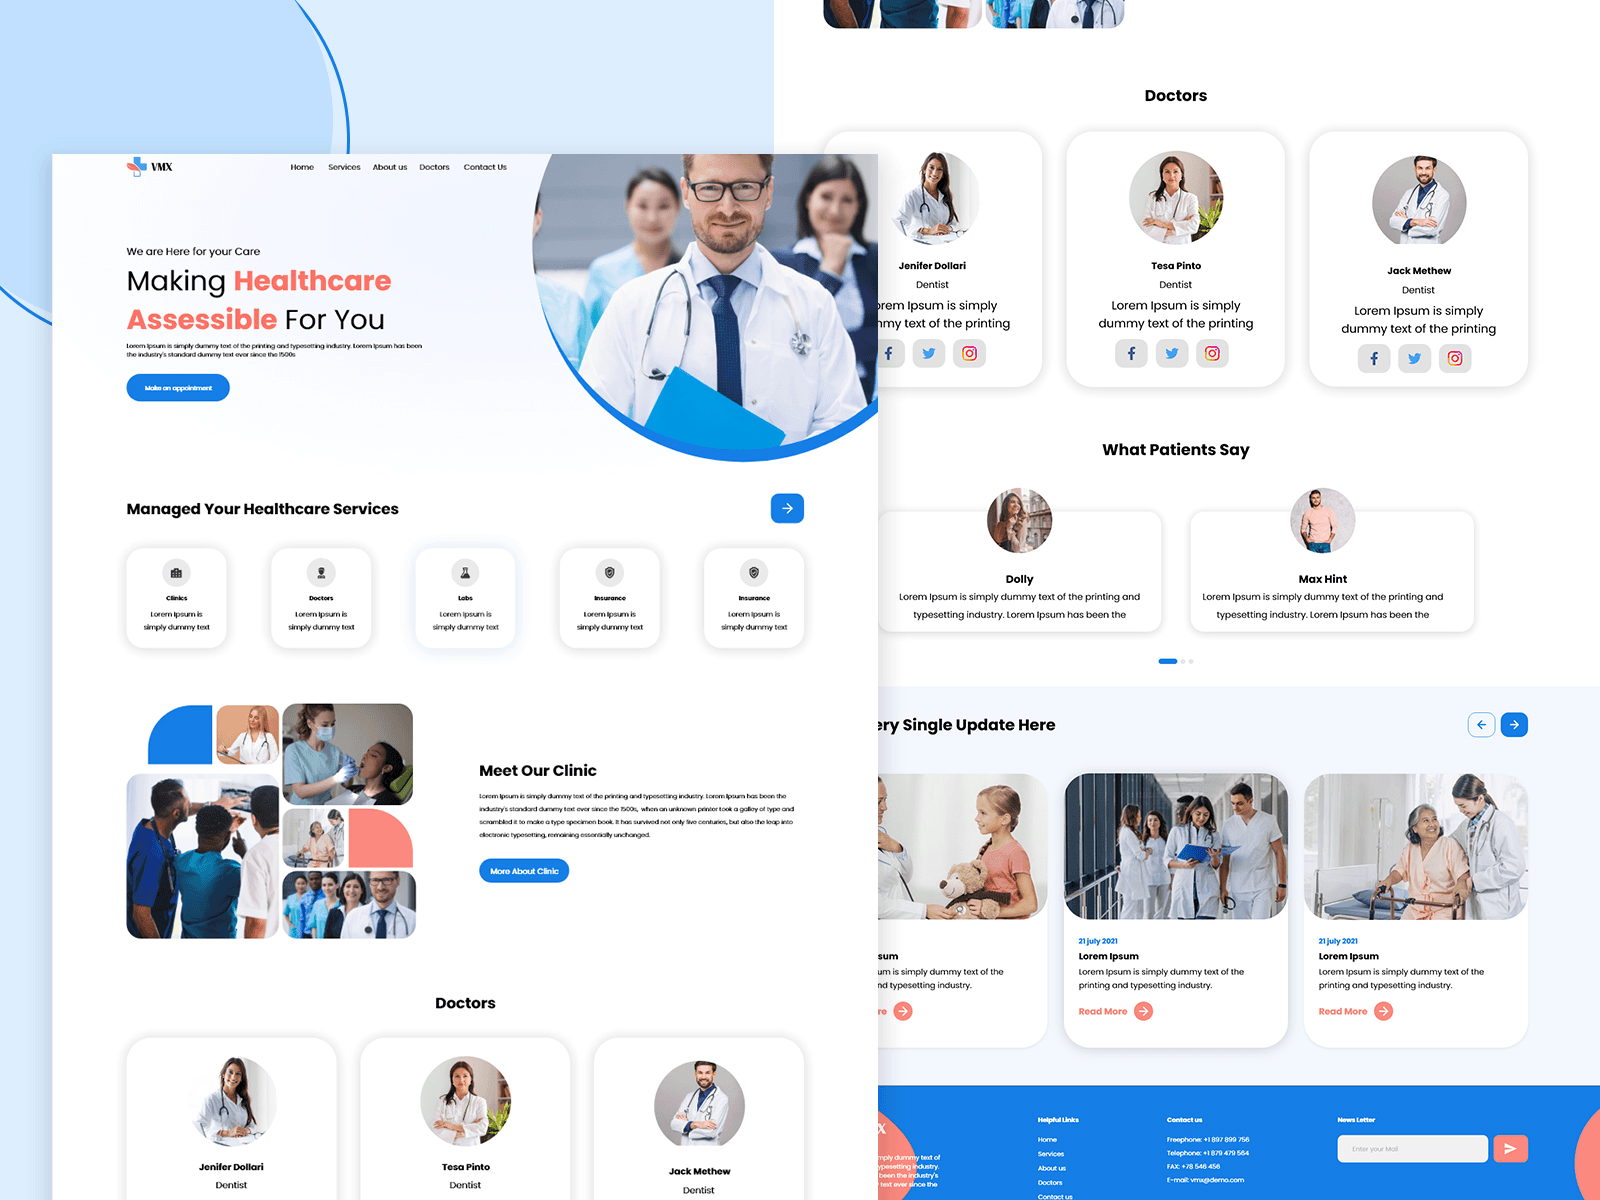 A Forebode of Good Health | Health Care Web Design clinic clinic web doctor doctors web good health web health healthcare helthcare website design web design web template web template design website website concept website design